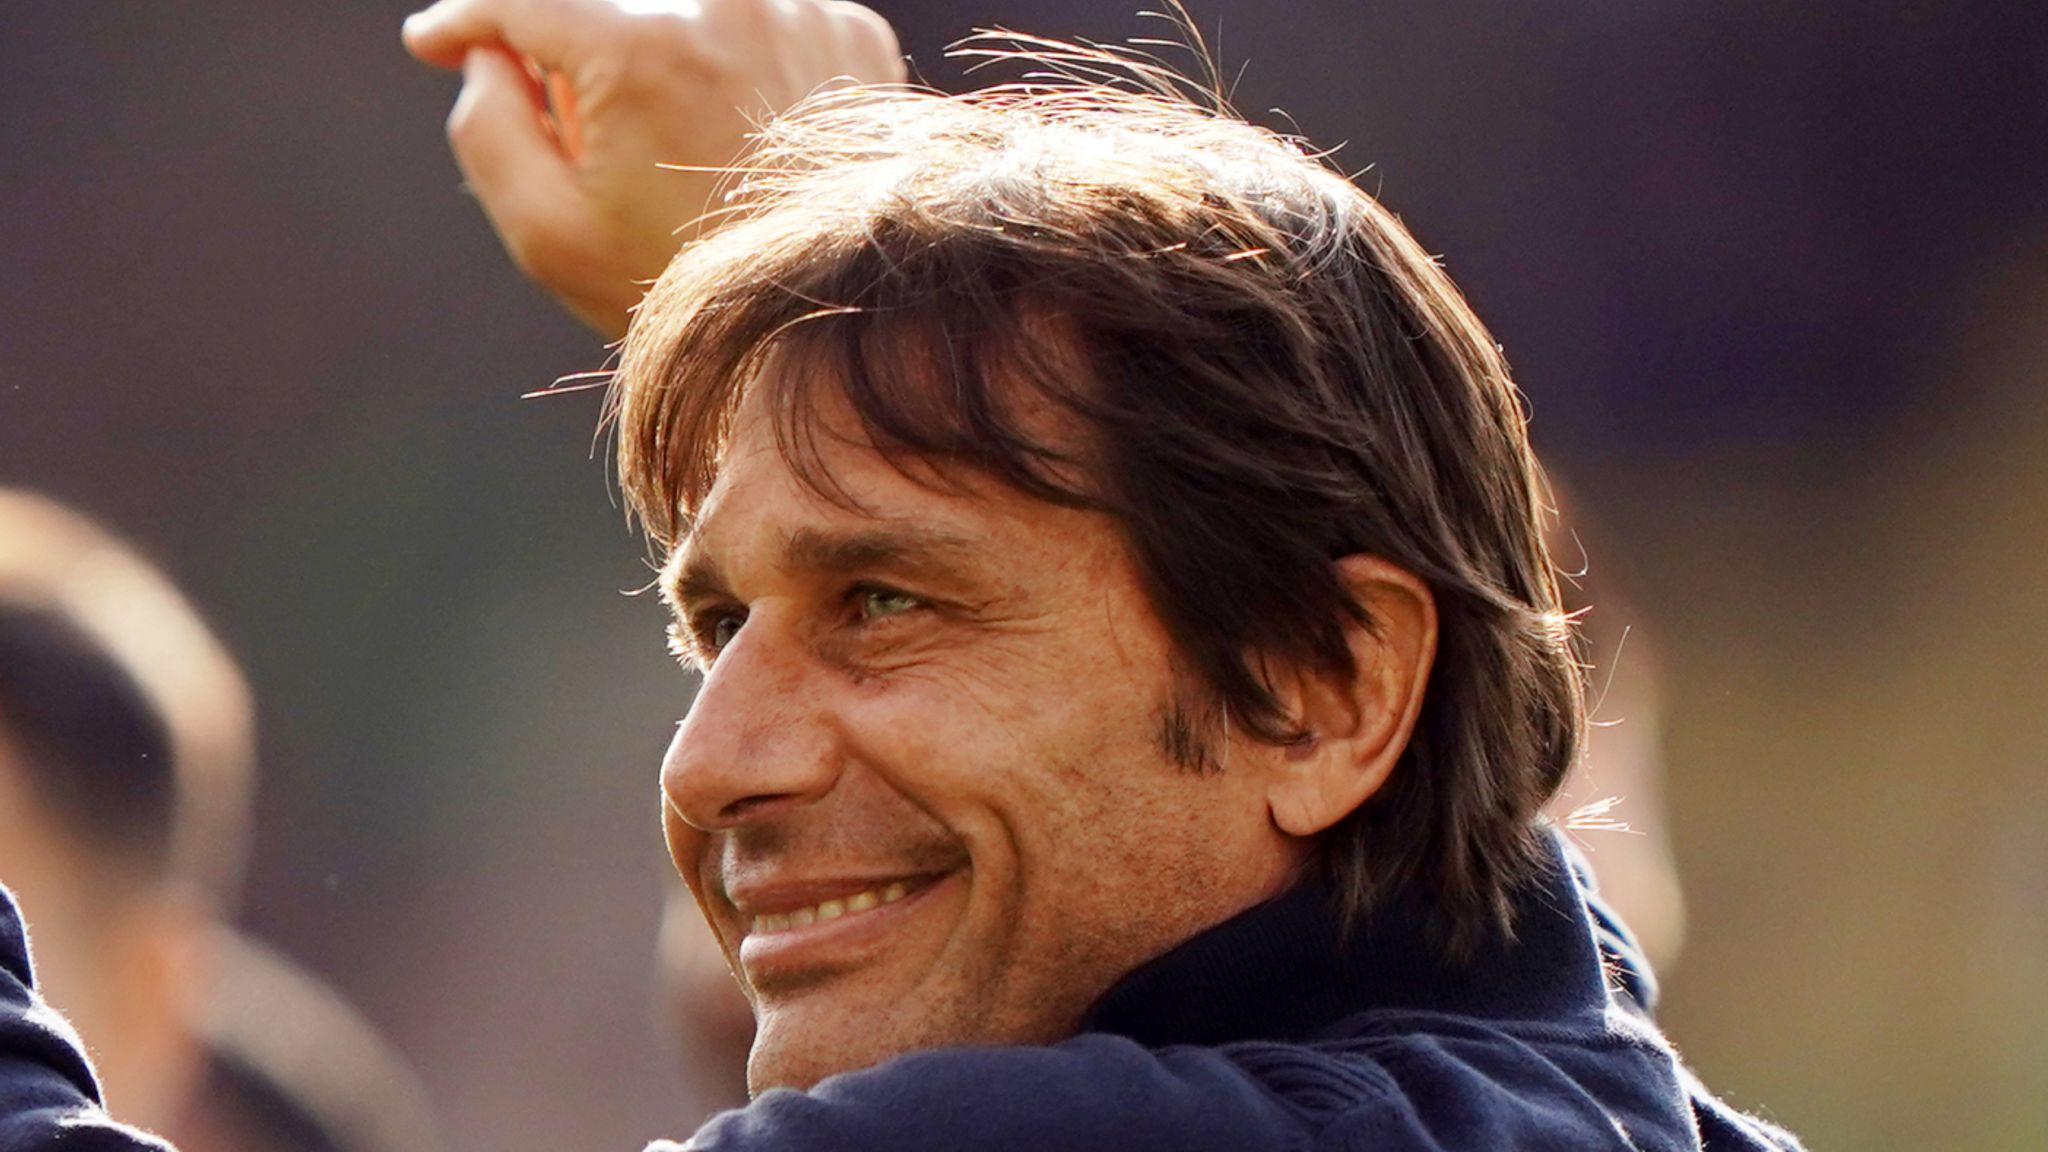 Antonio Conte: Spurs boss to speak with club in summer over his